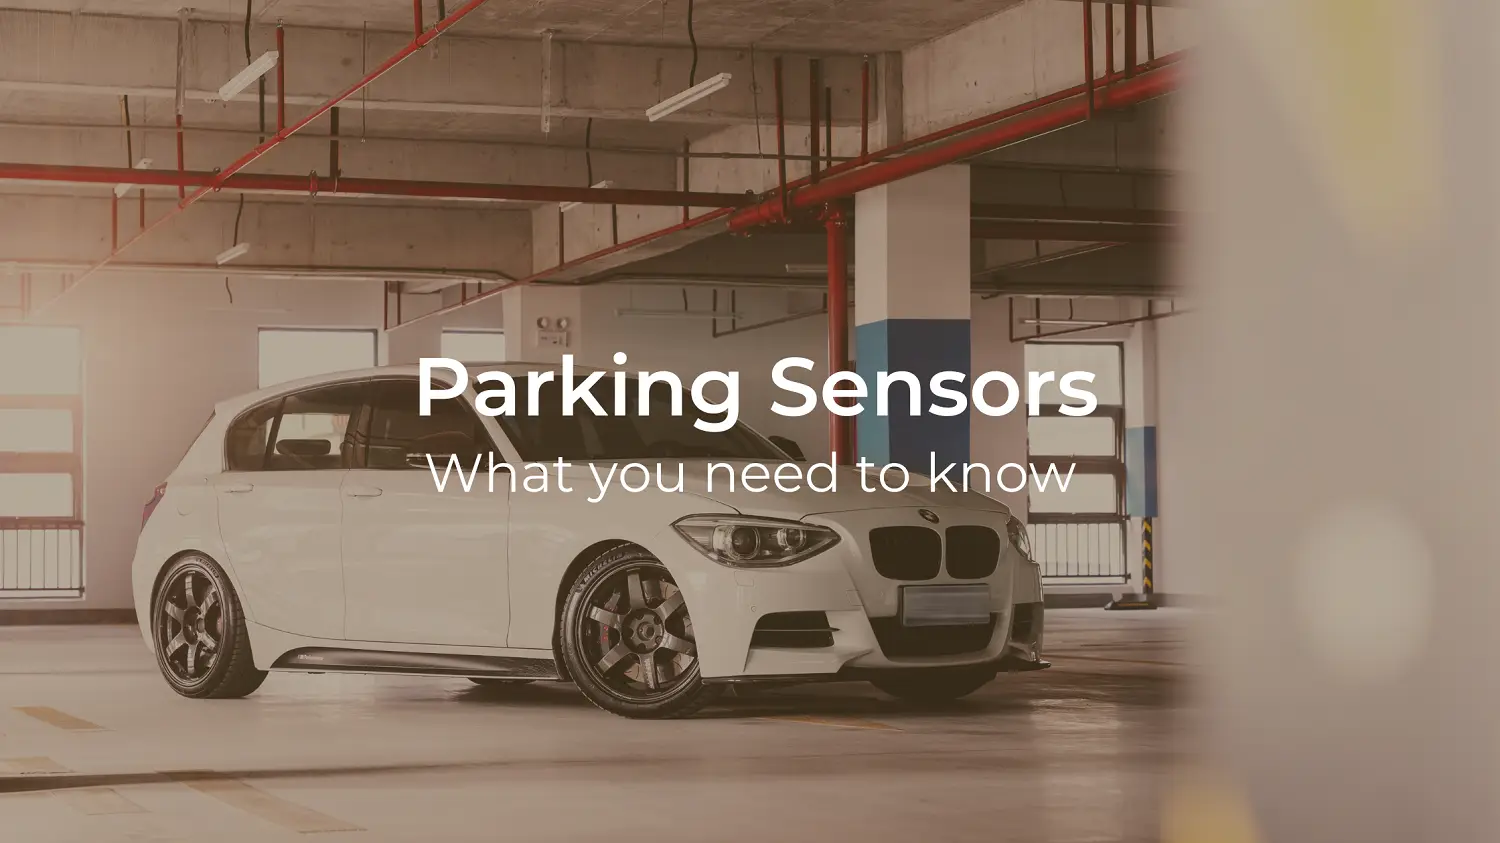 Parking Sensors - What You Need to Know